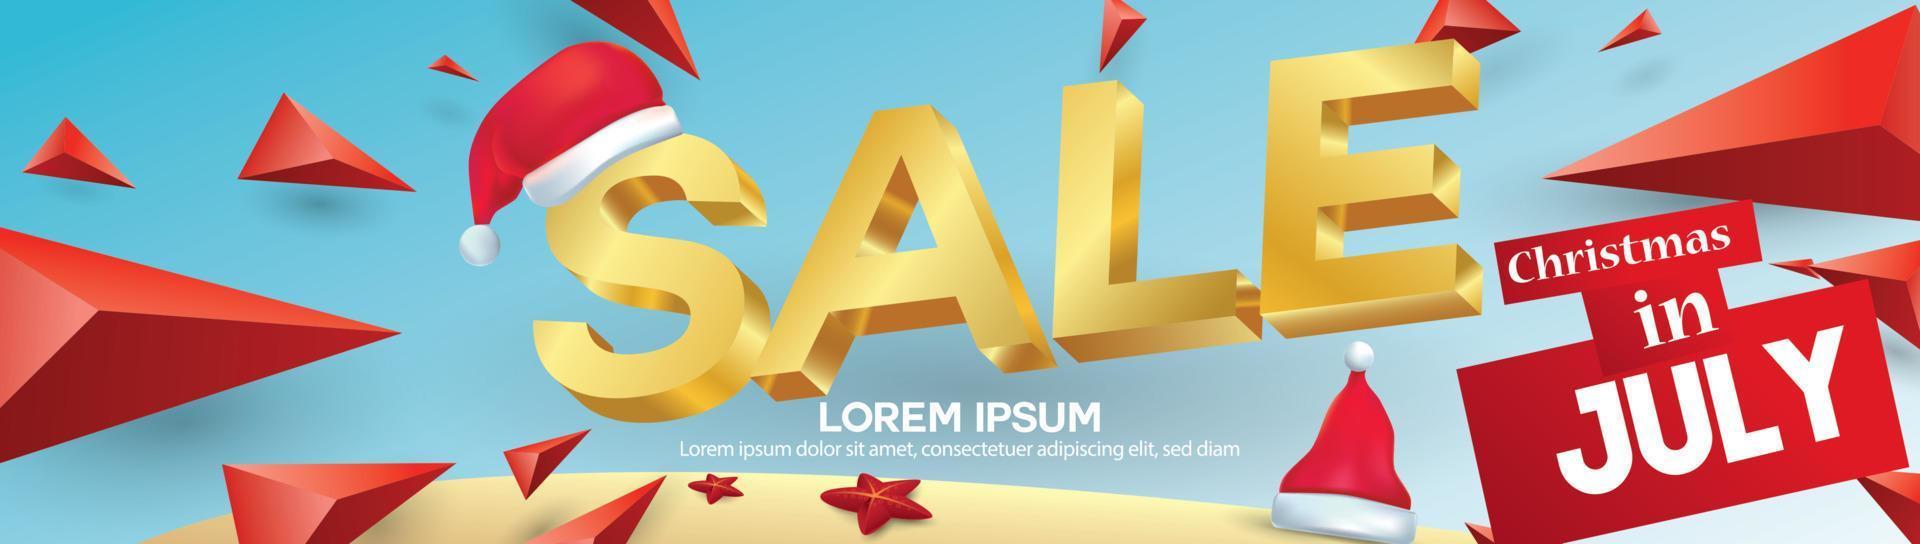 Christmas in June, July, August, for poster, marketing, advertising, summer sale, banner in summer with copy space discount offer vector